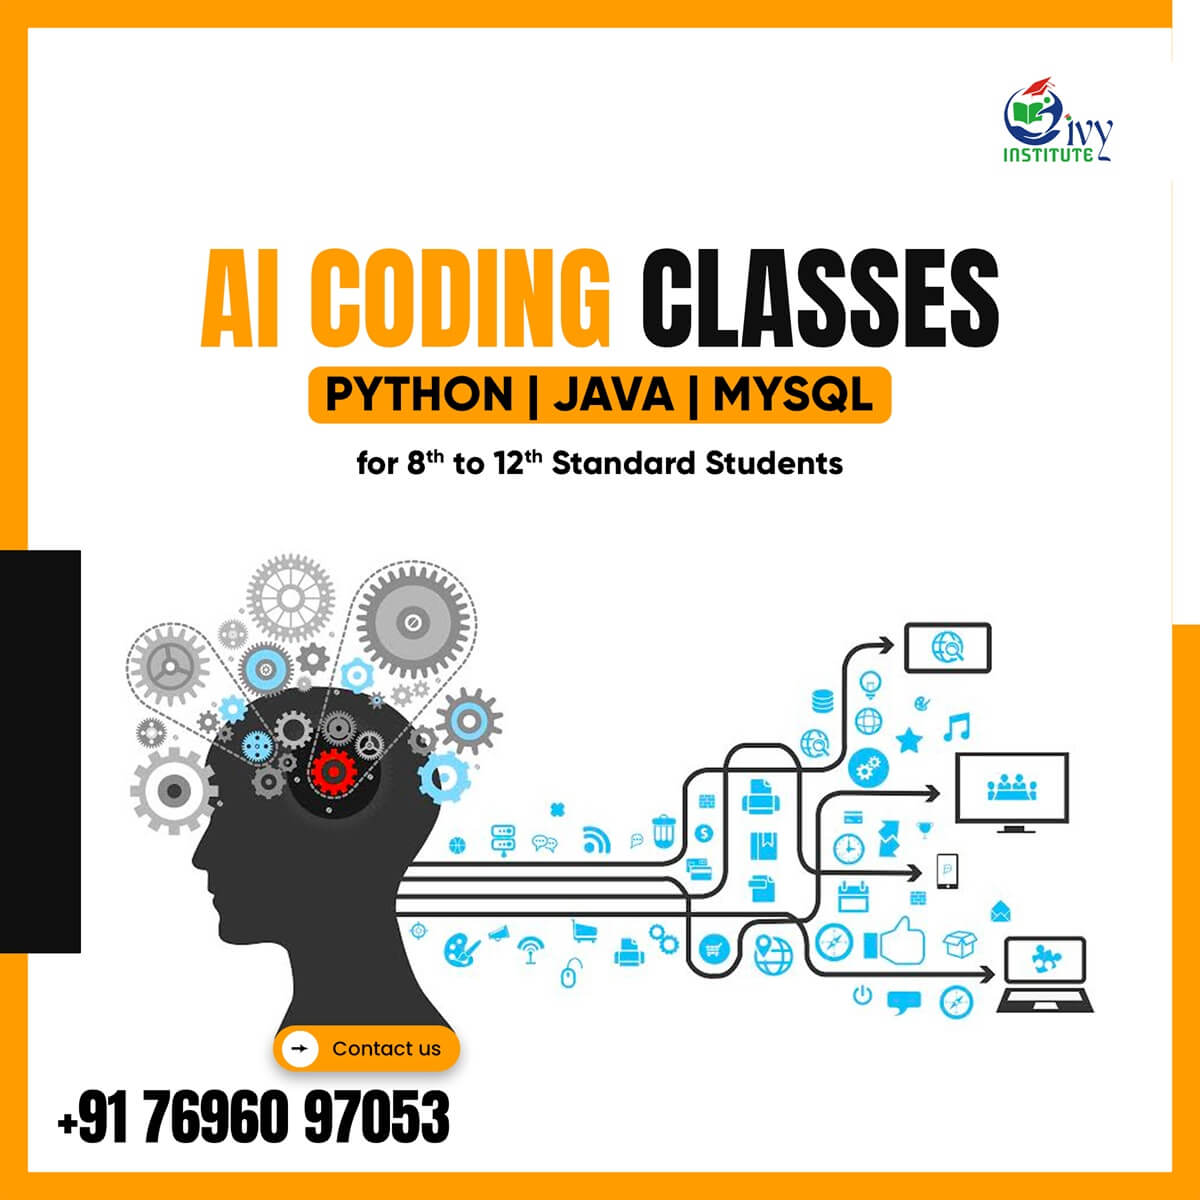 Special batches of Python, Java and MYSQL for school students at IVY